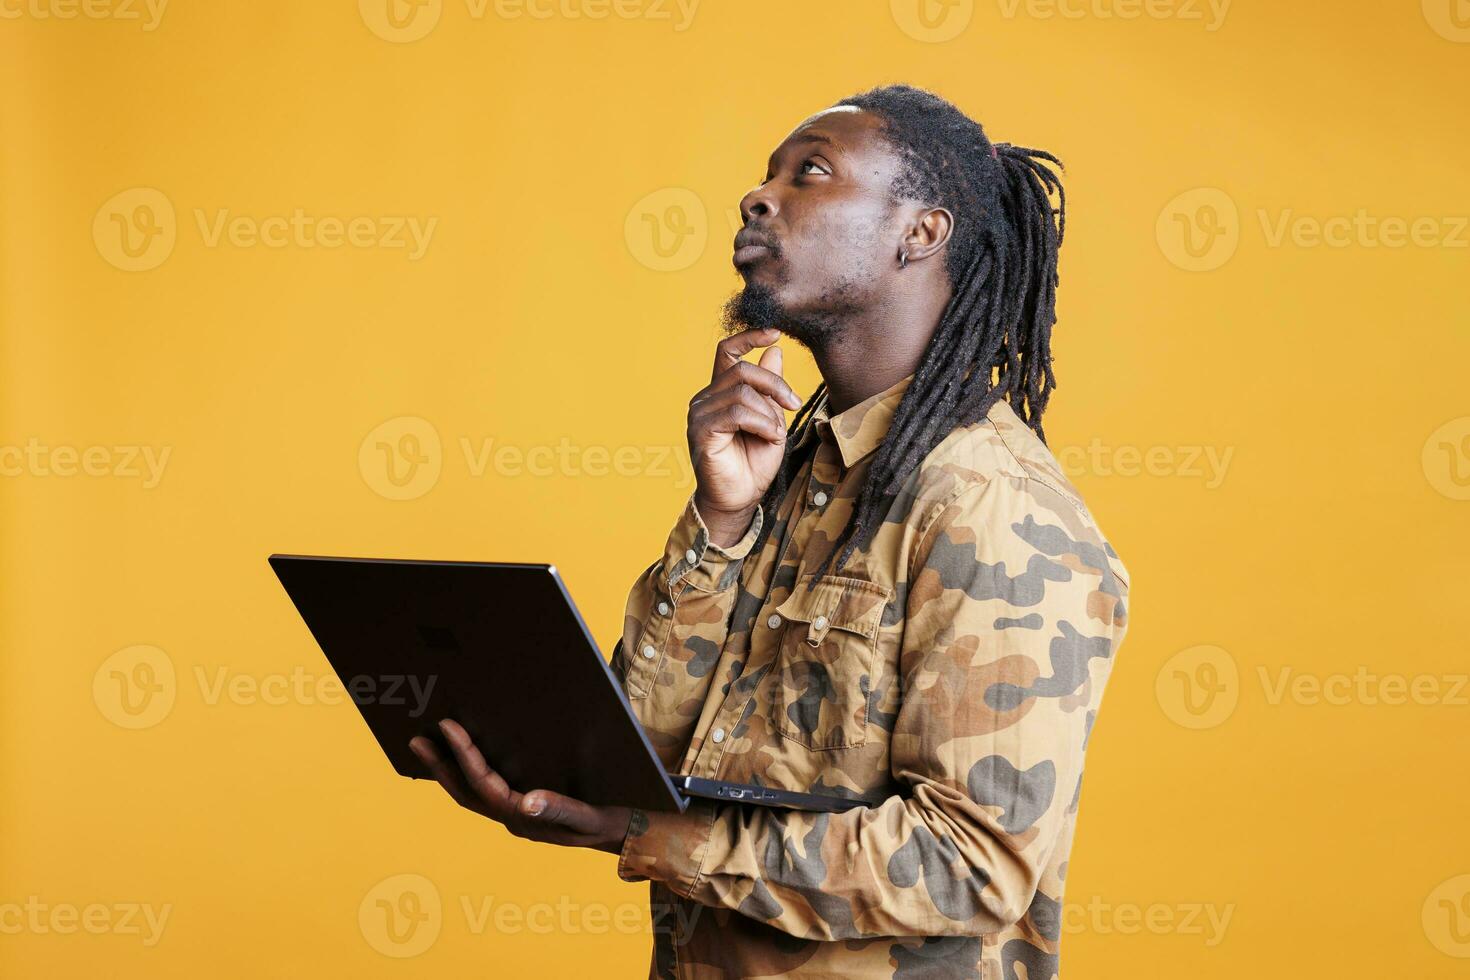 African american man searching webpages on internet using laptop computer, standing in studio over yellow background. Young adult using portable gadget to navigate on social media photo